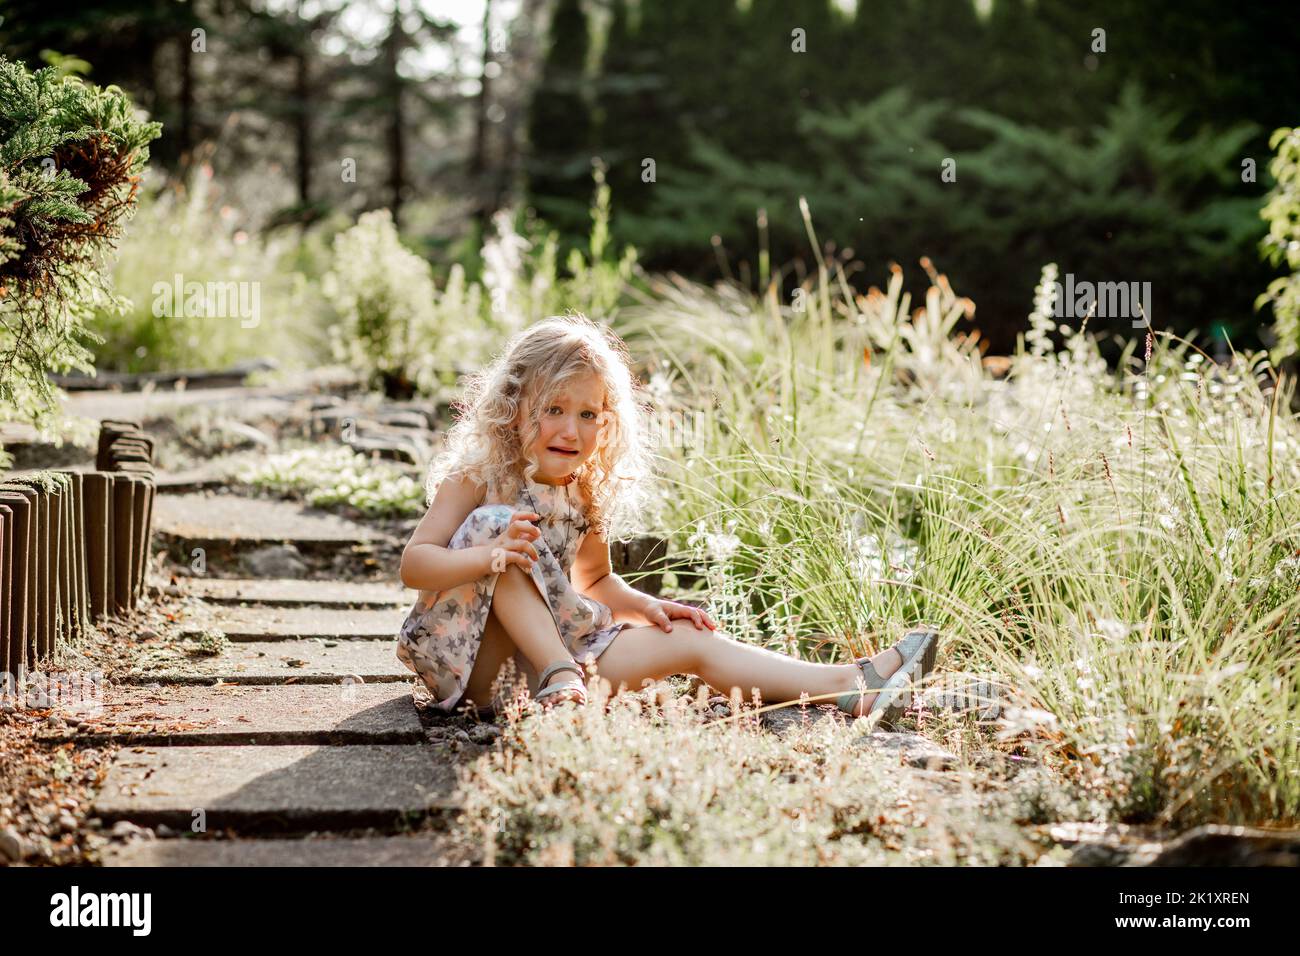 Sad, upset, crying little blonde curly girl in dress sitting on wood road in grass, near meadow or forest. Child abuse Stock Photo